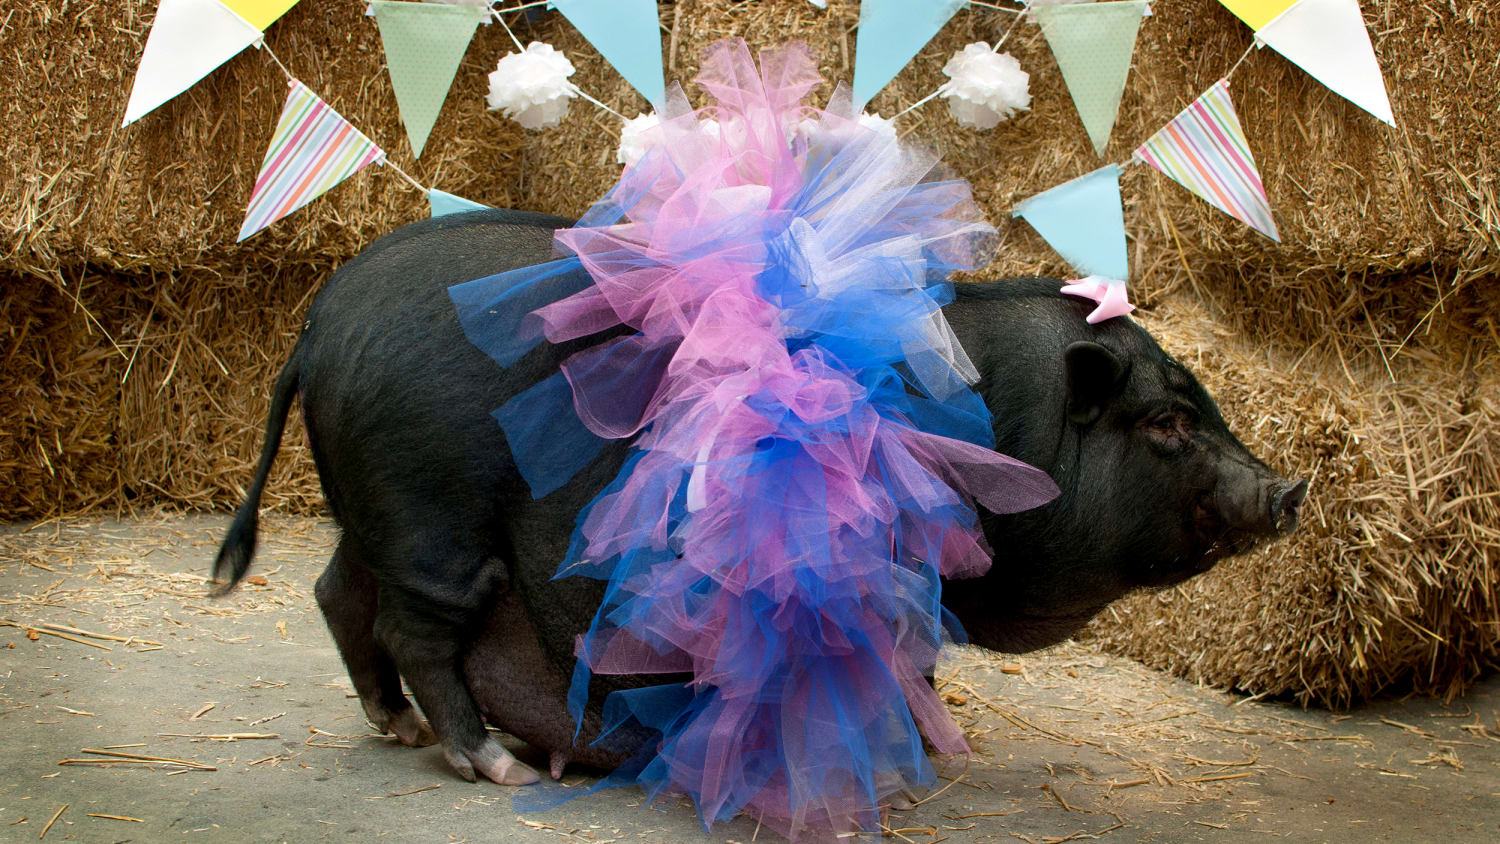 This pregnant pig’s maternity shoot is tutu charming - TODAY.com